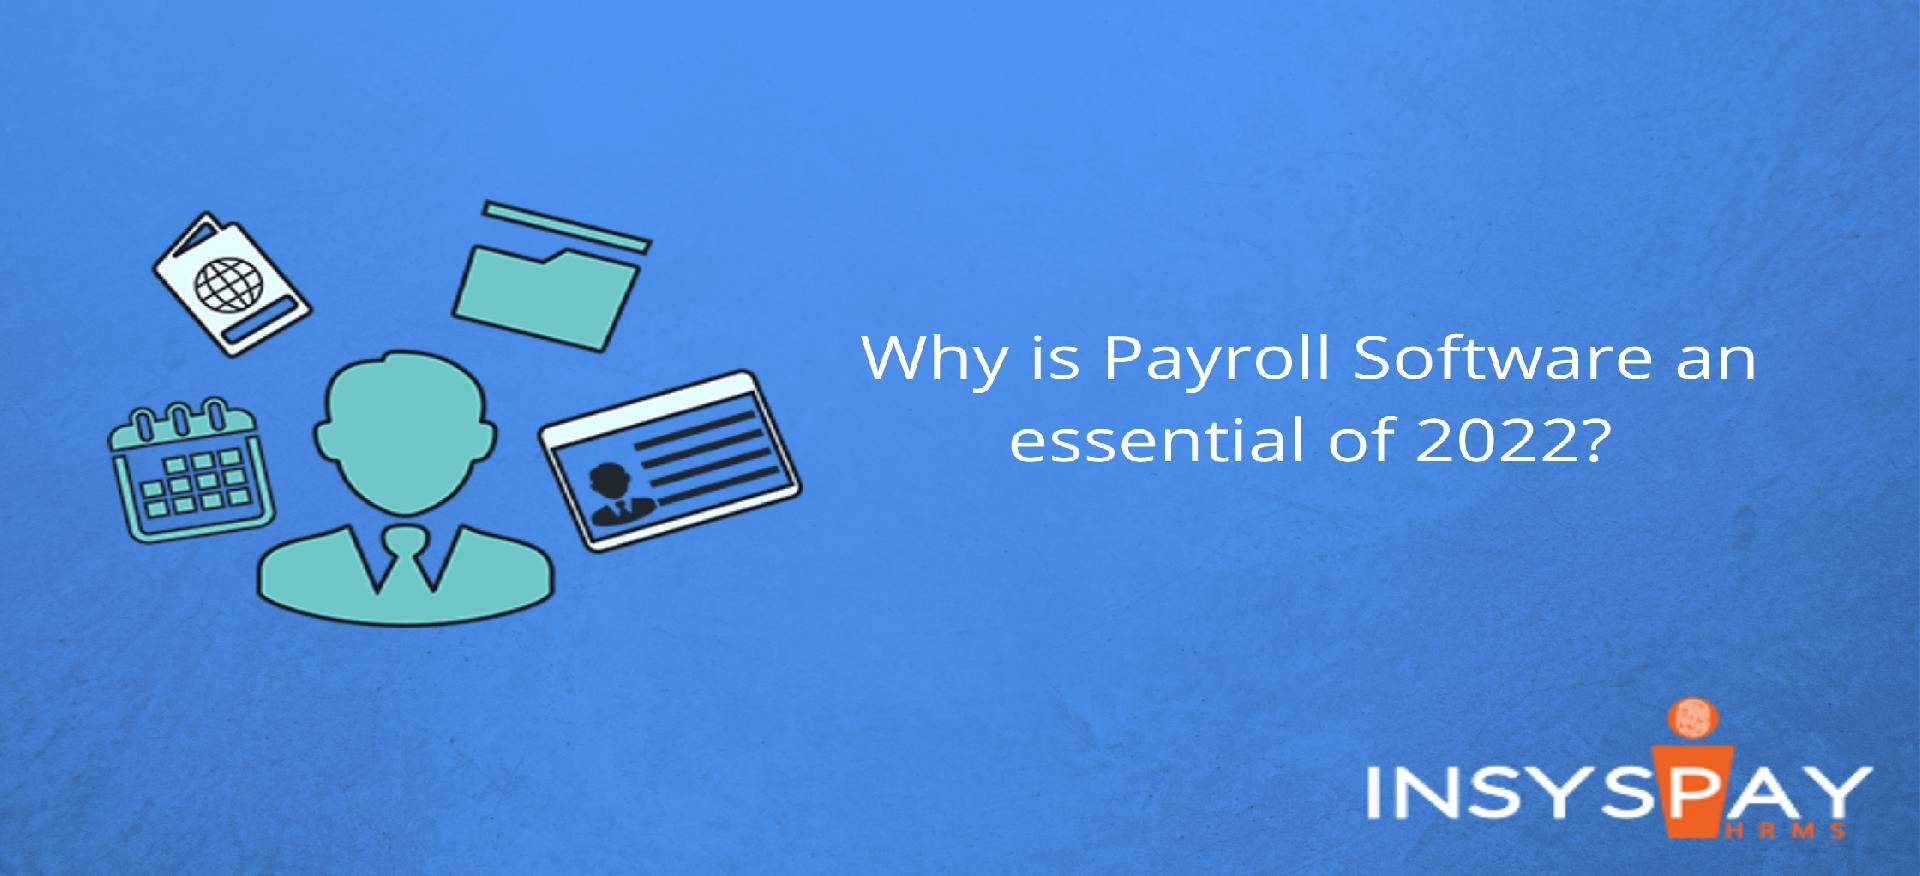 Why is Payroll Software an essential of 2022?